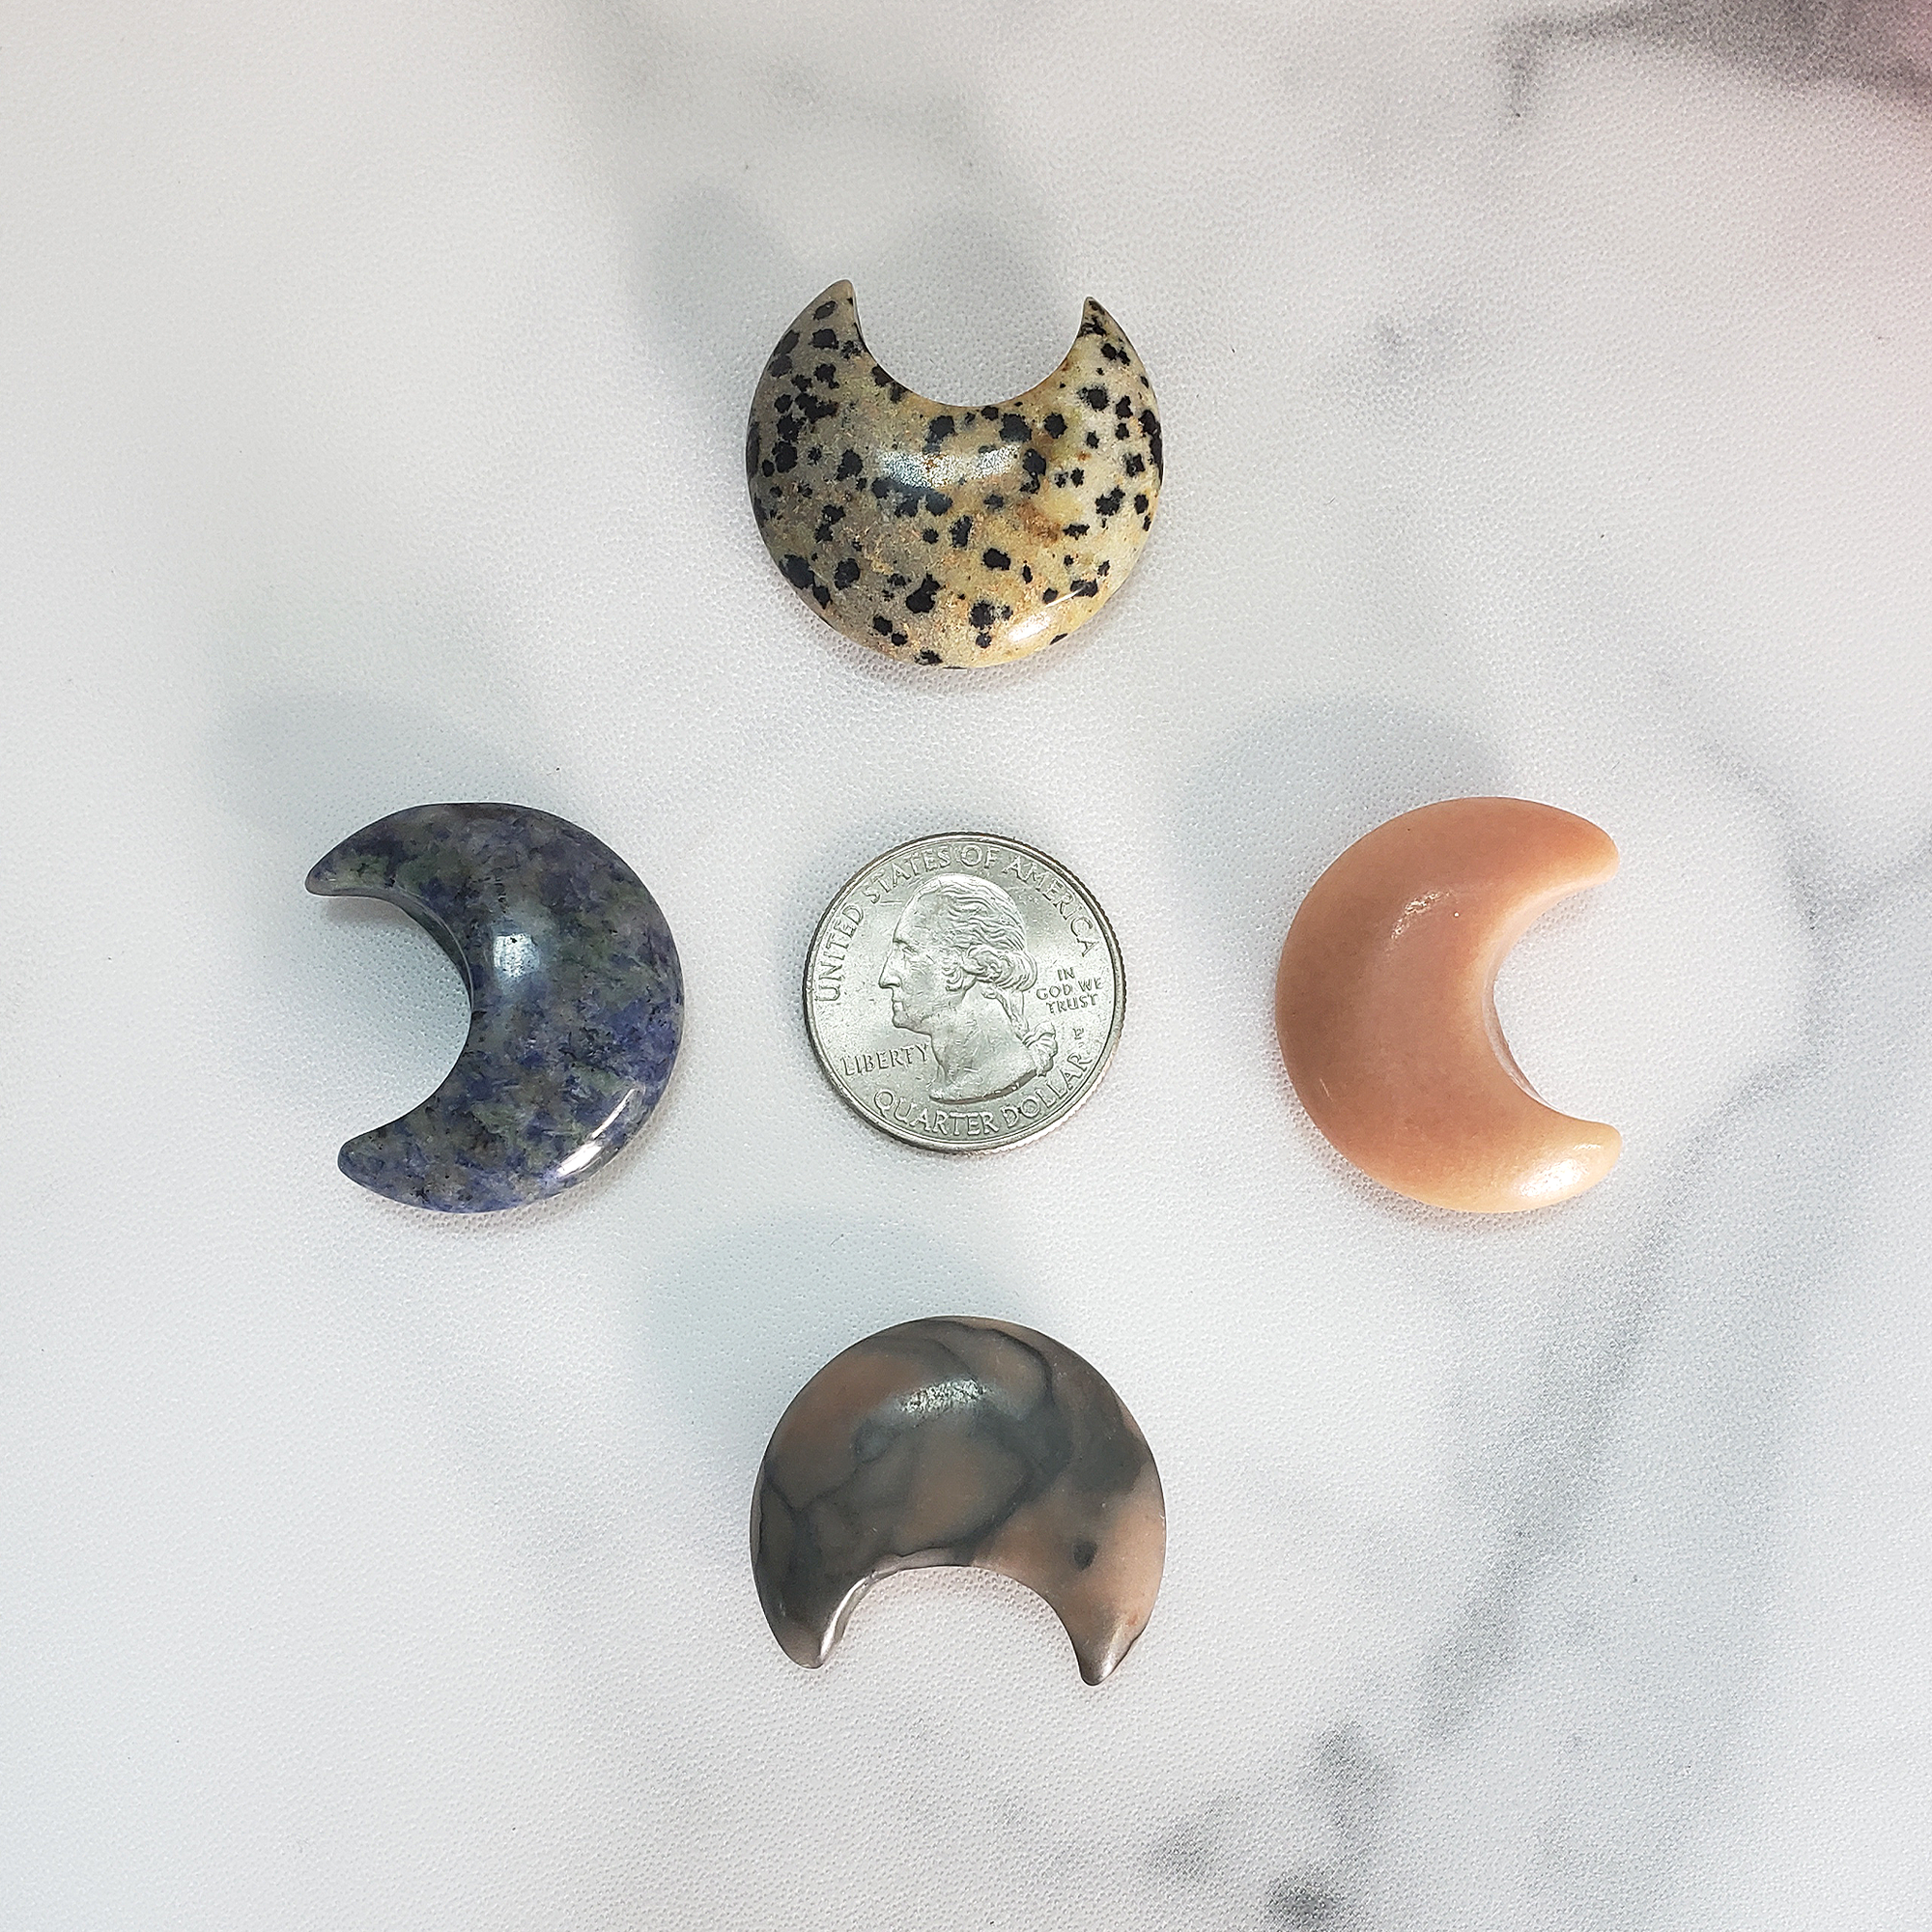 Intuitively Chosen Natural Gemstone Crescent Moon Carving Fidget Stone - Size Comparison